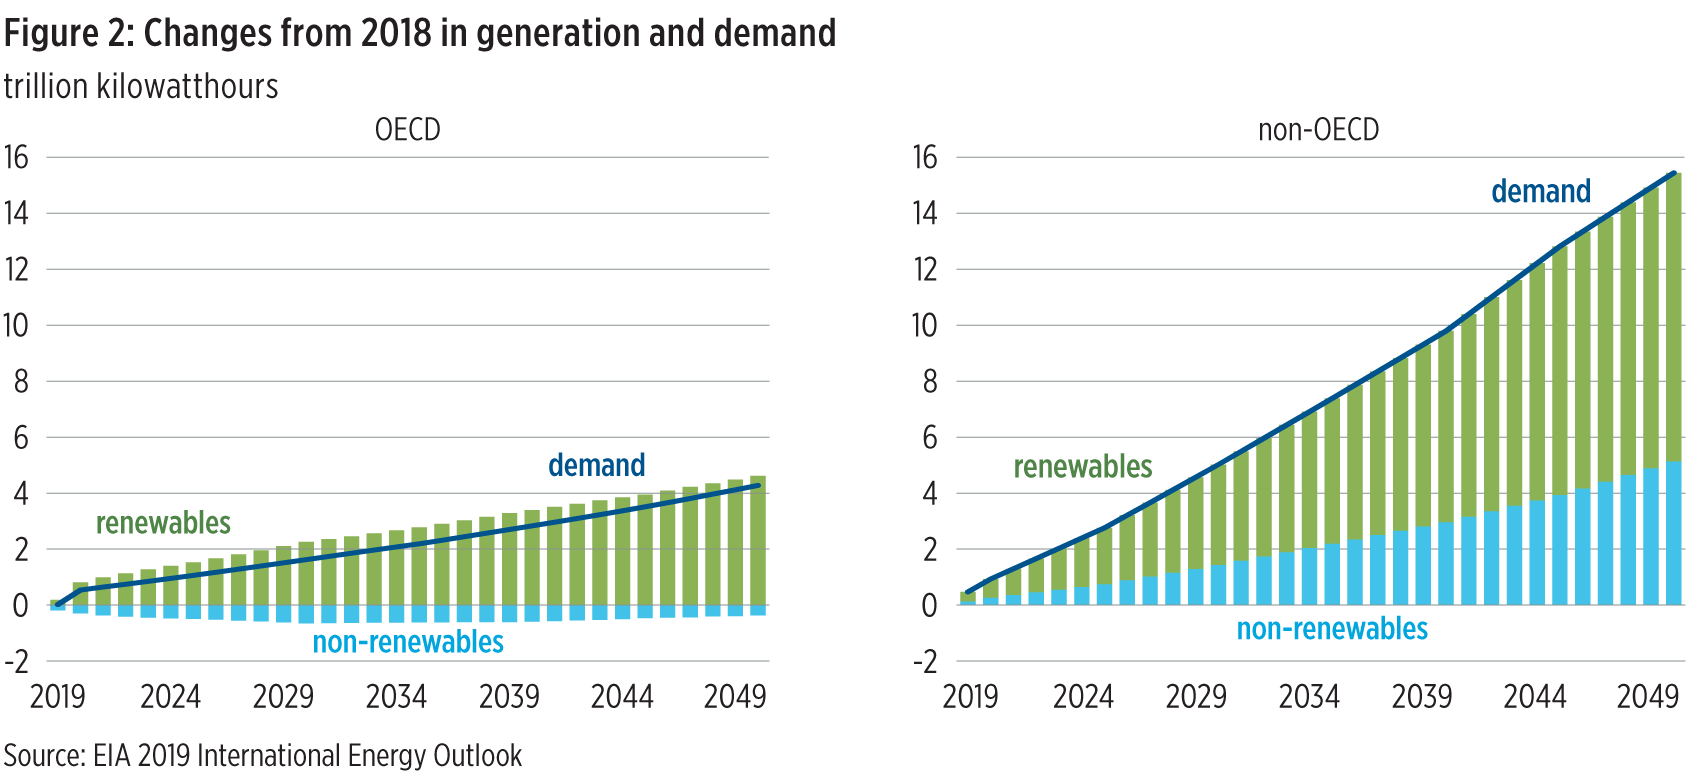 Figure 2: Changes from 2018 in generation and demand